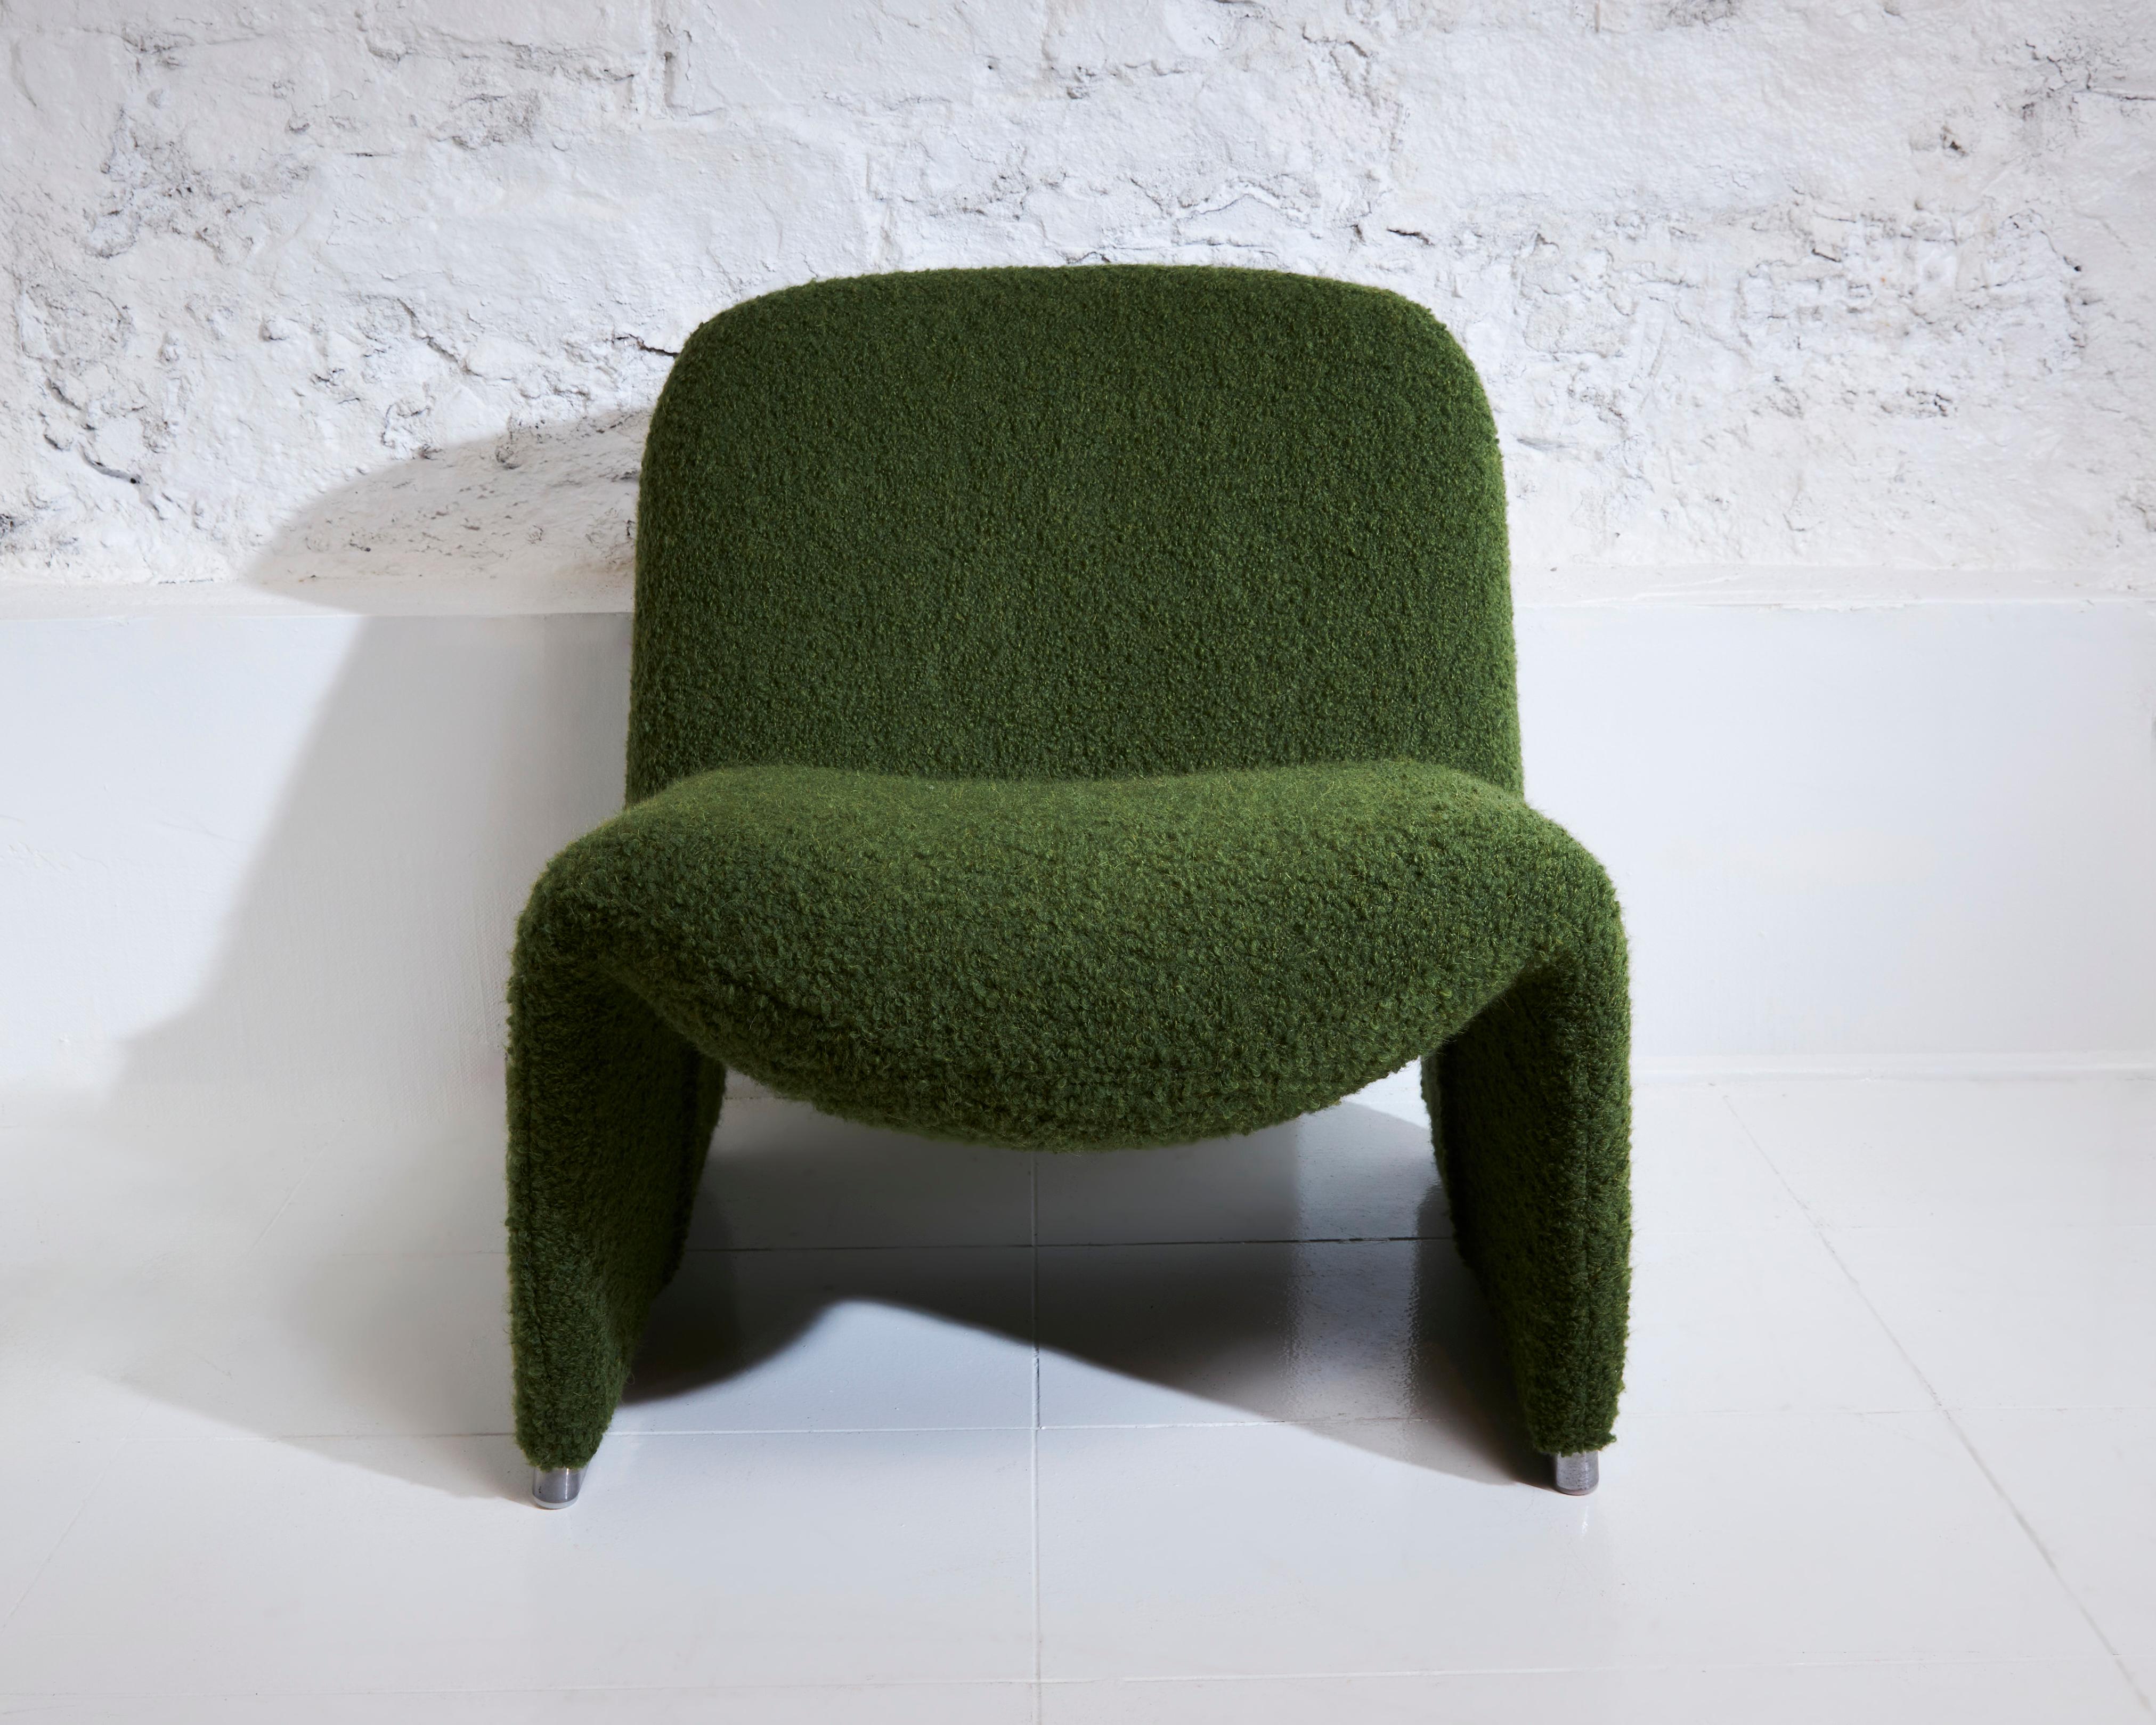 The Alky armchair, created by Giancarlo Piretti in the late 1960s, continues to captivate with its distinctive lounge chair design, which remains unparalleled even today. This multifunctional armchair seamlessly blends comfort, design, and